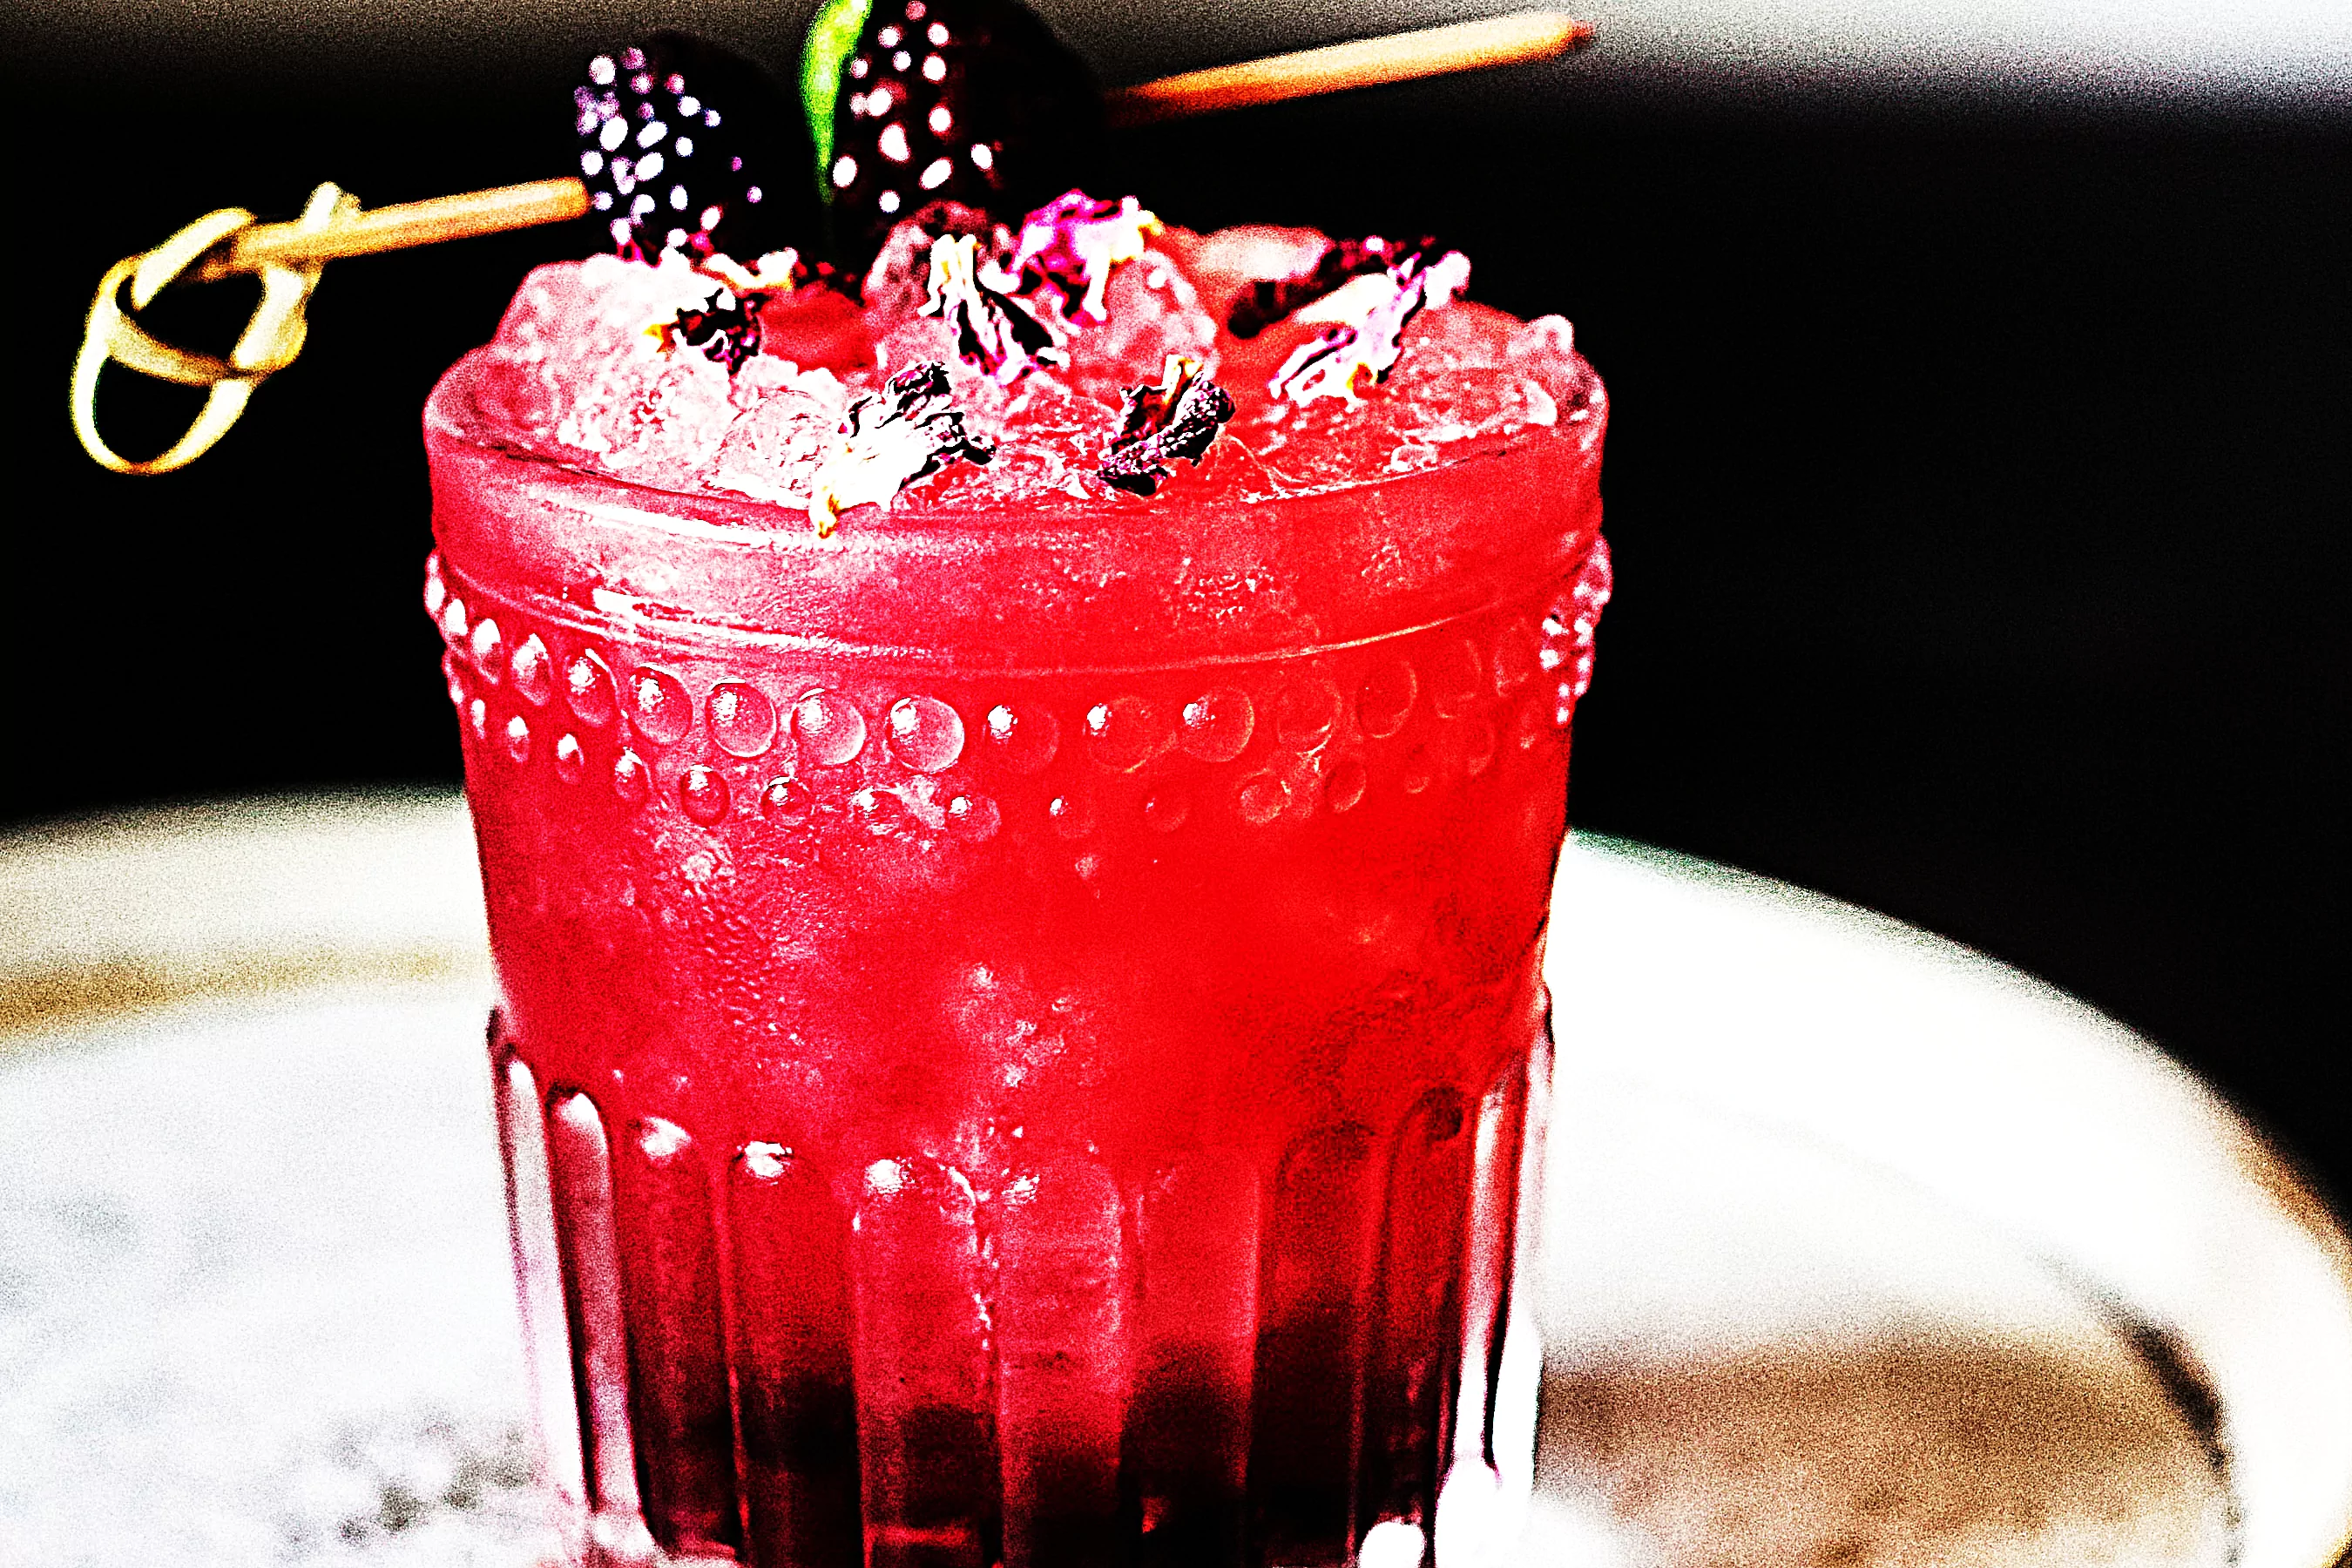 Stupid-Easy Recipe for Blackberry Smash (#1 Top-Rated)